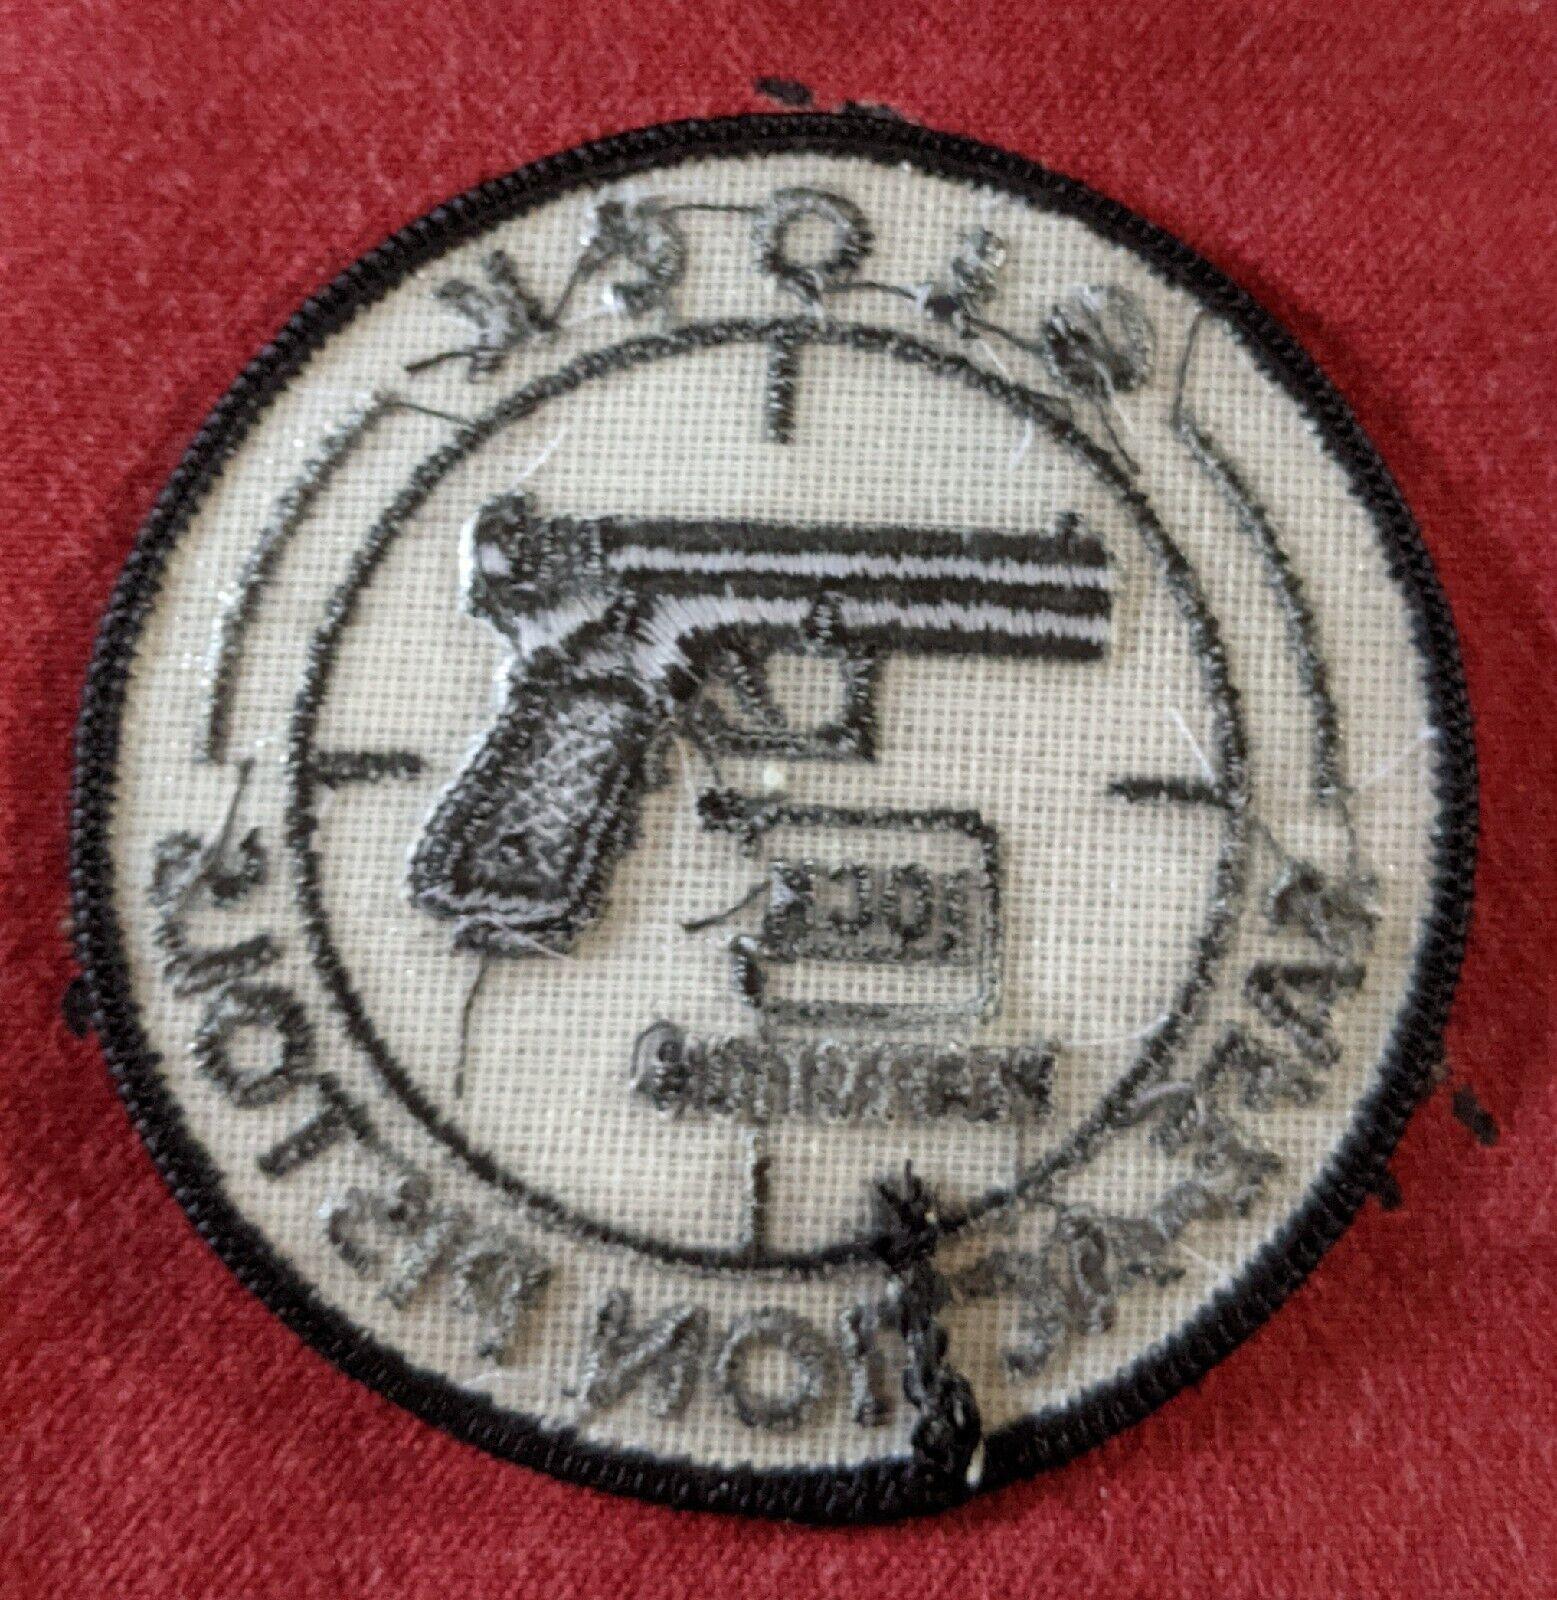 GLOCK® IRON-ON PATCH, EMBOIDED - NeonSales South Africa